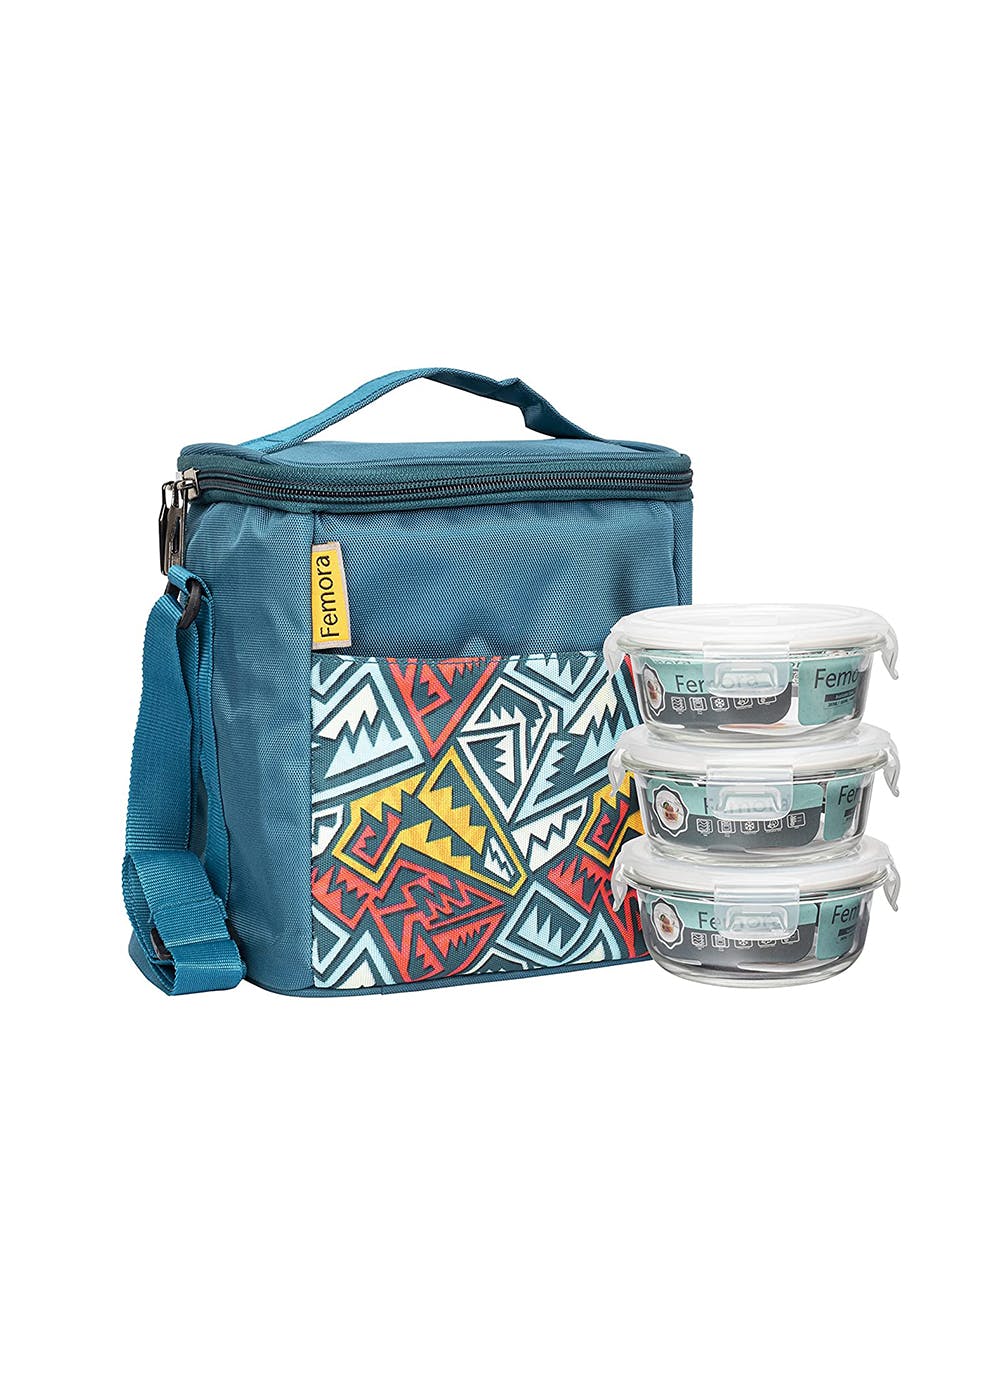 Shop For The Best Local Brands In Lunch Boxes Online